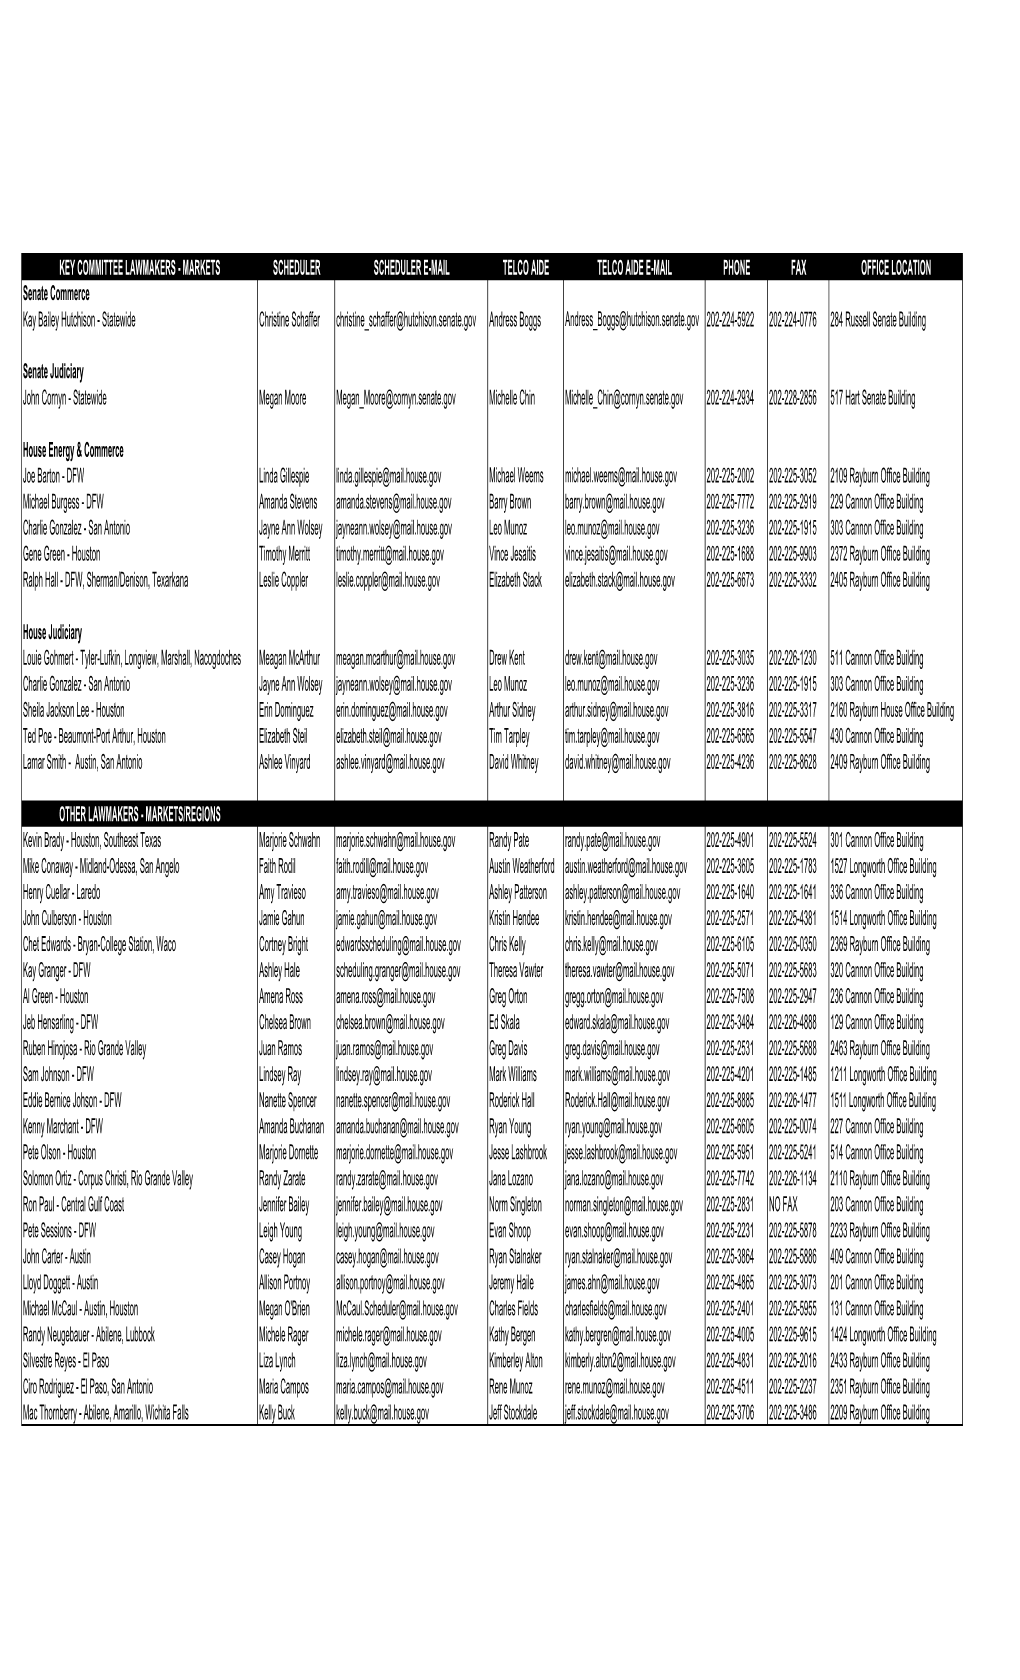 TX Congressional Contact List May 2010